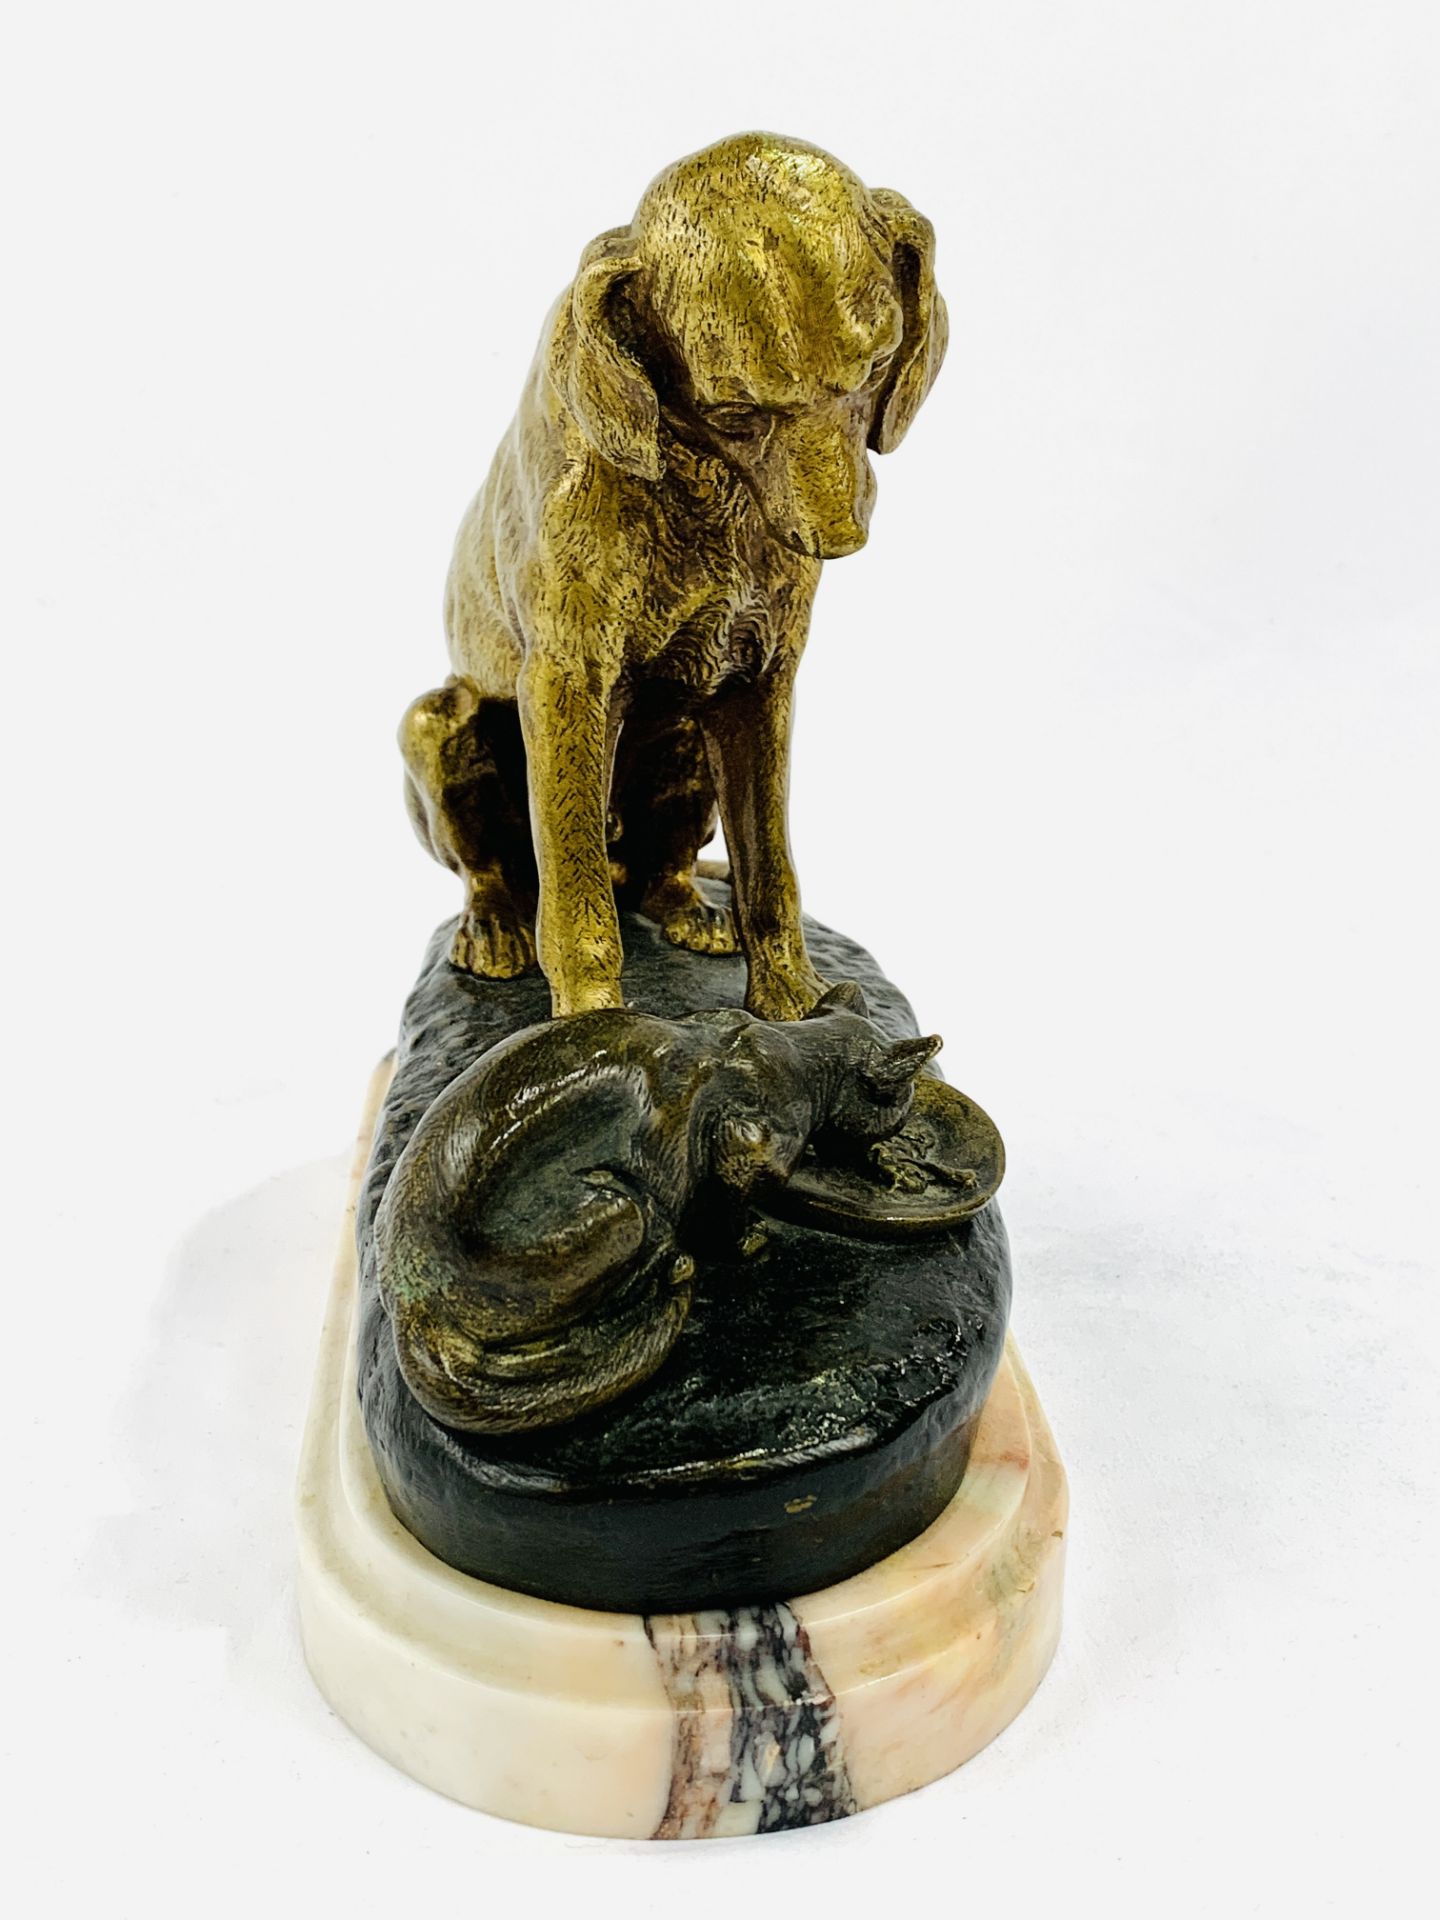 Brass/bronze figure of a dog sitting over a cat eating from a dish, signed A de Gericke - Image 5 of 5